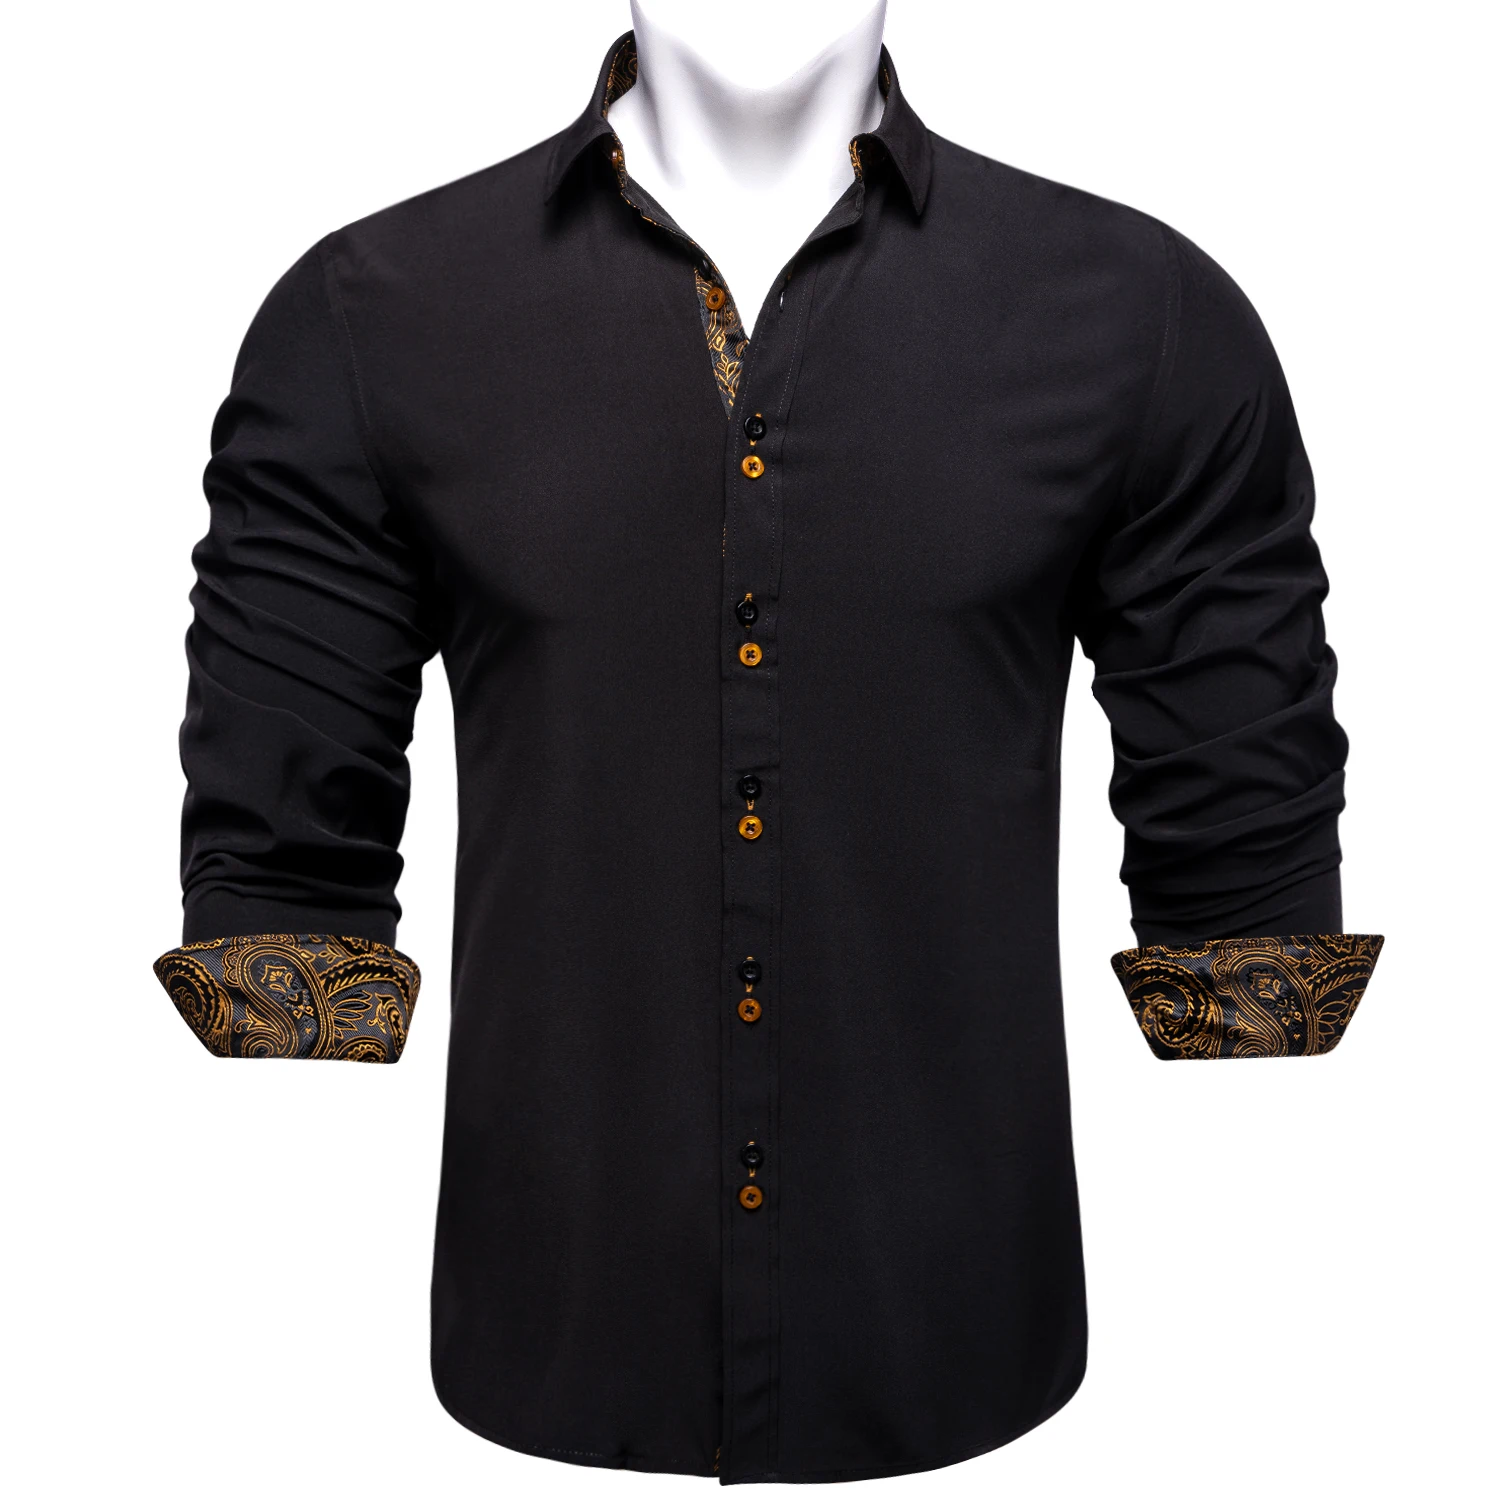 

Classic Black camisa masculina Party Shirt For Men Button Turn-Down Collar Man Shirts Causal Long Sleeve Spring Patchwork Blouse